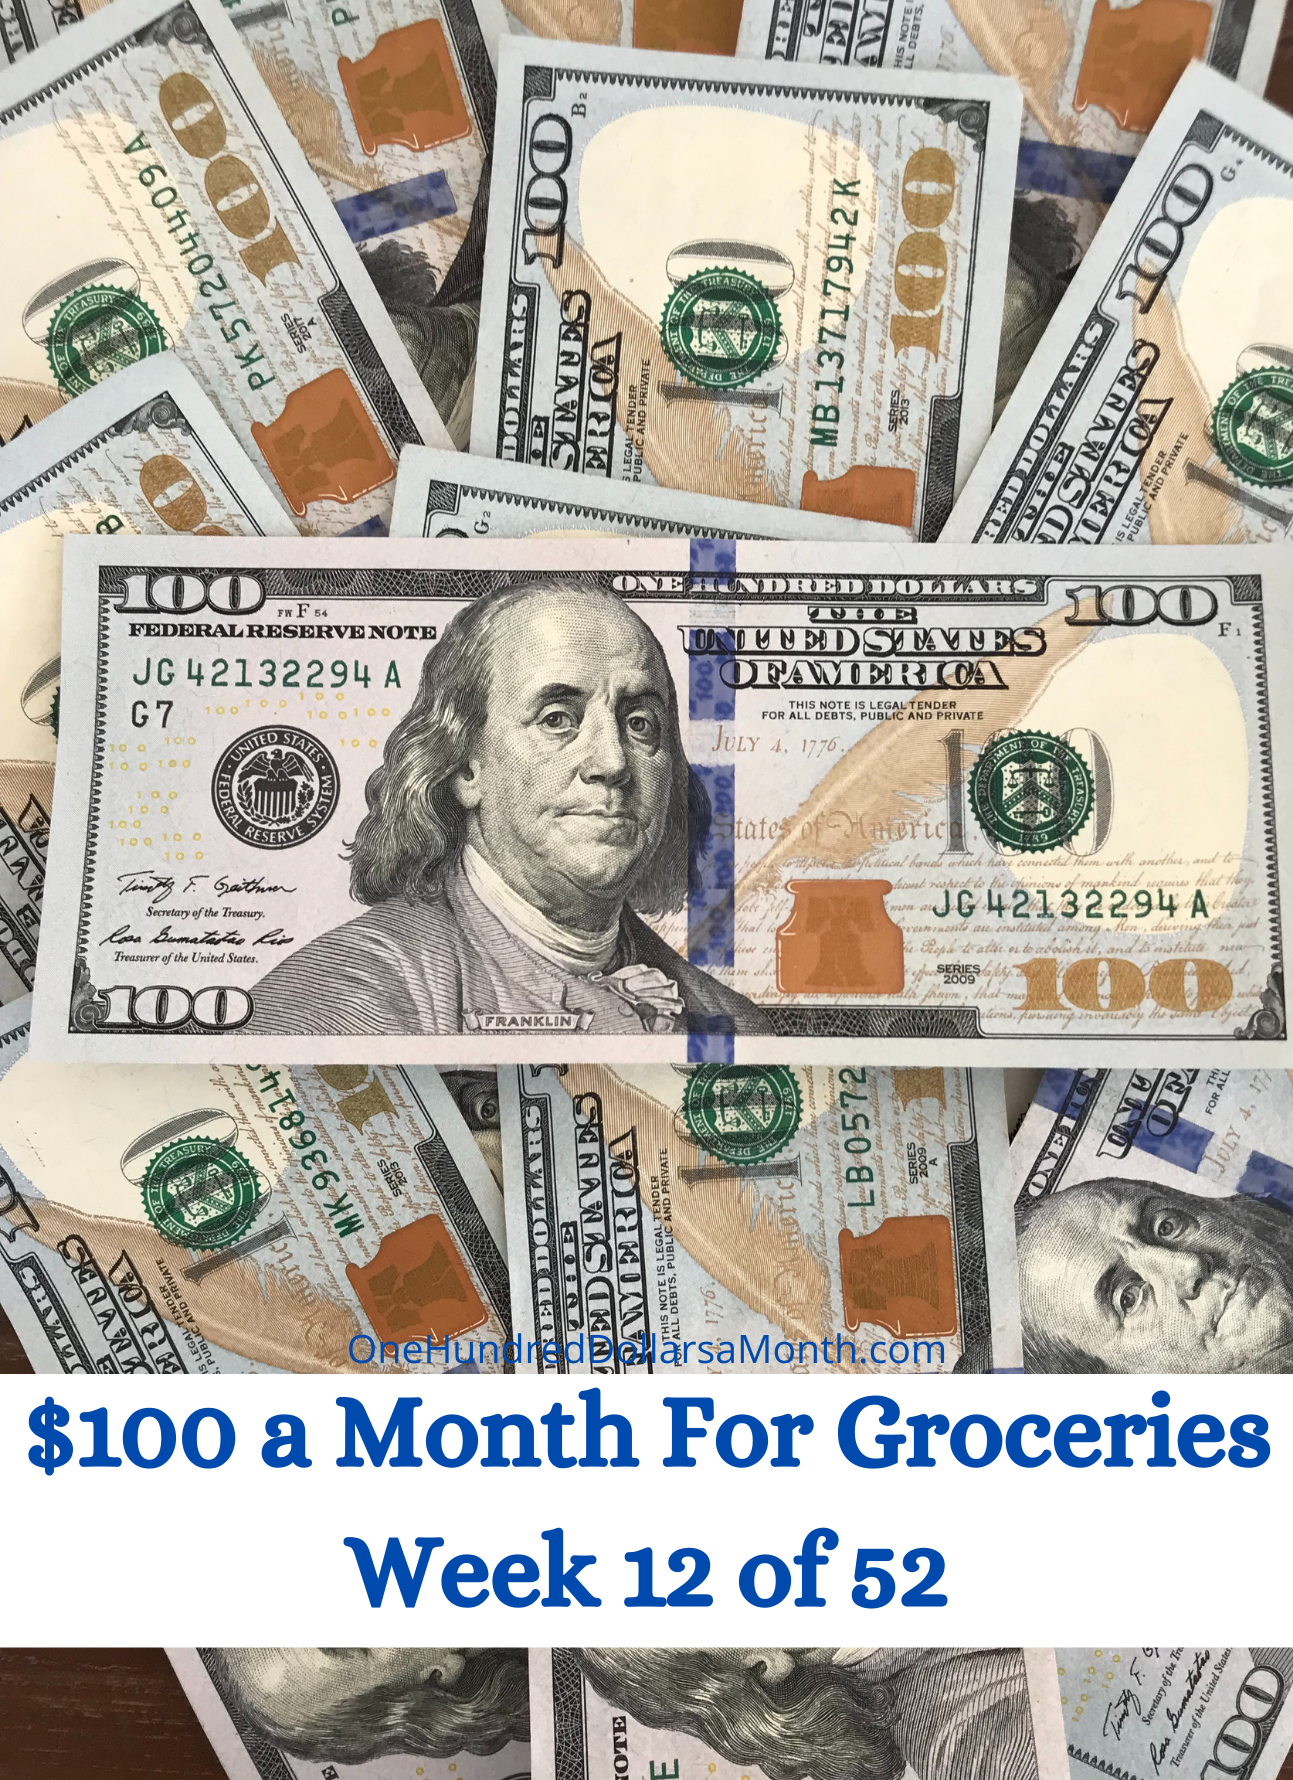 $100 a Month For Groceries – Week 12 of 52